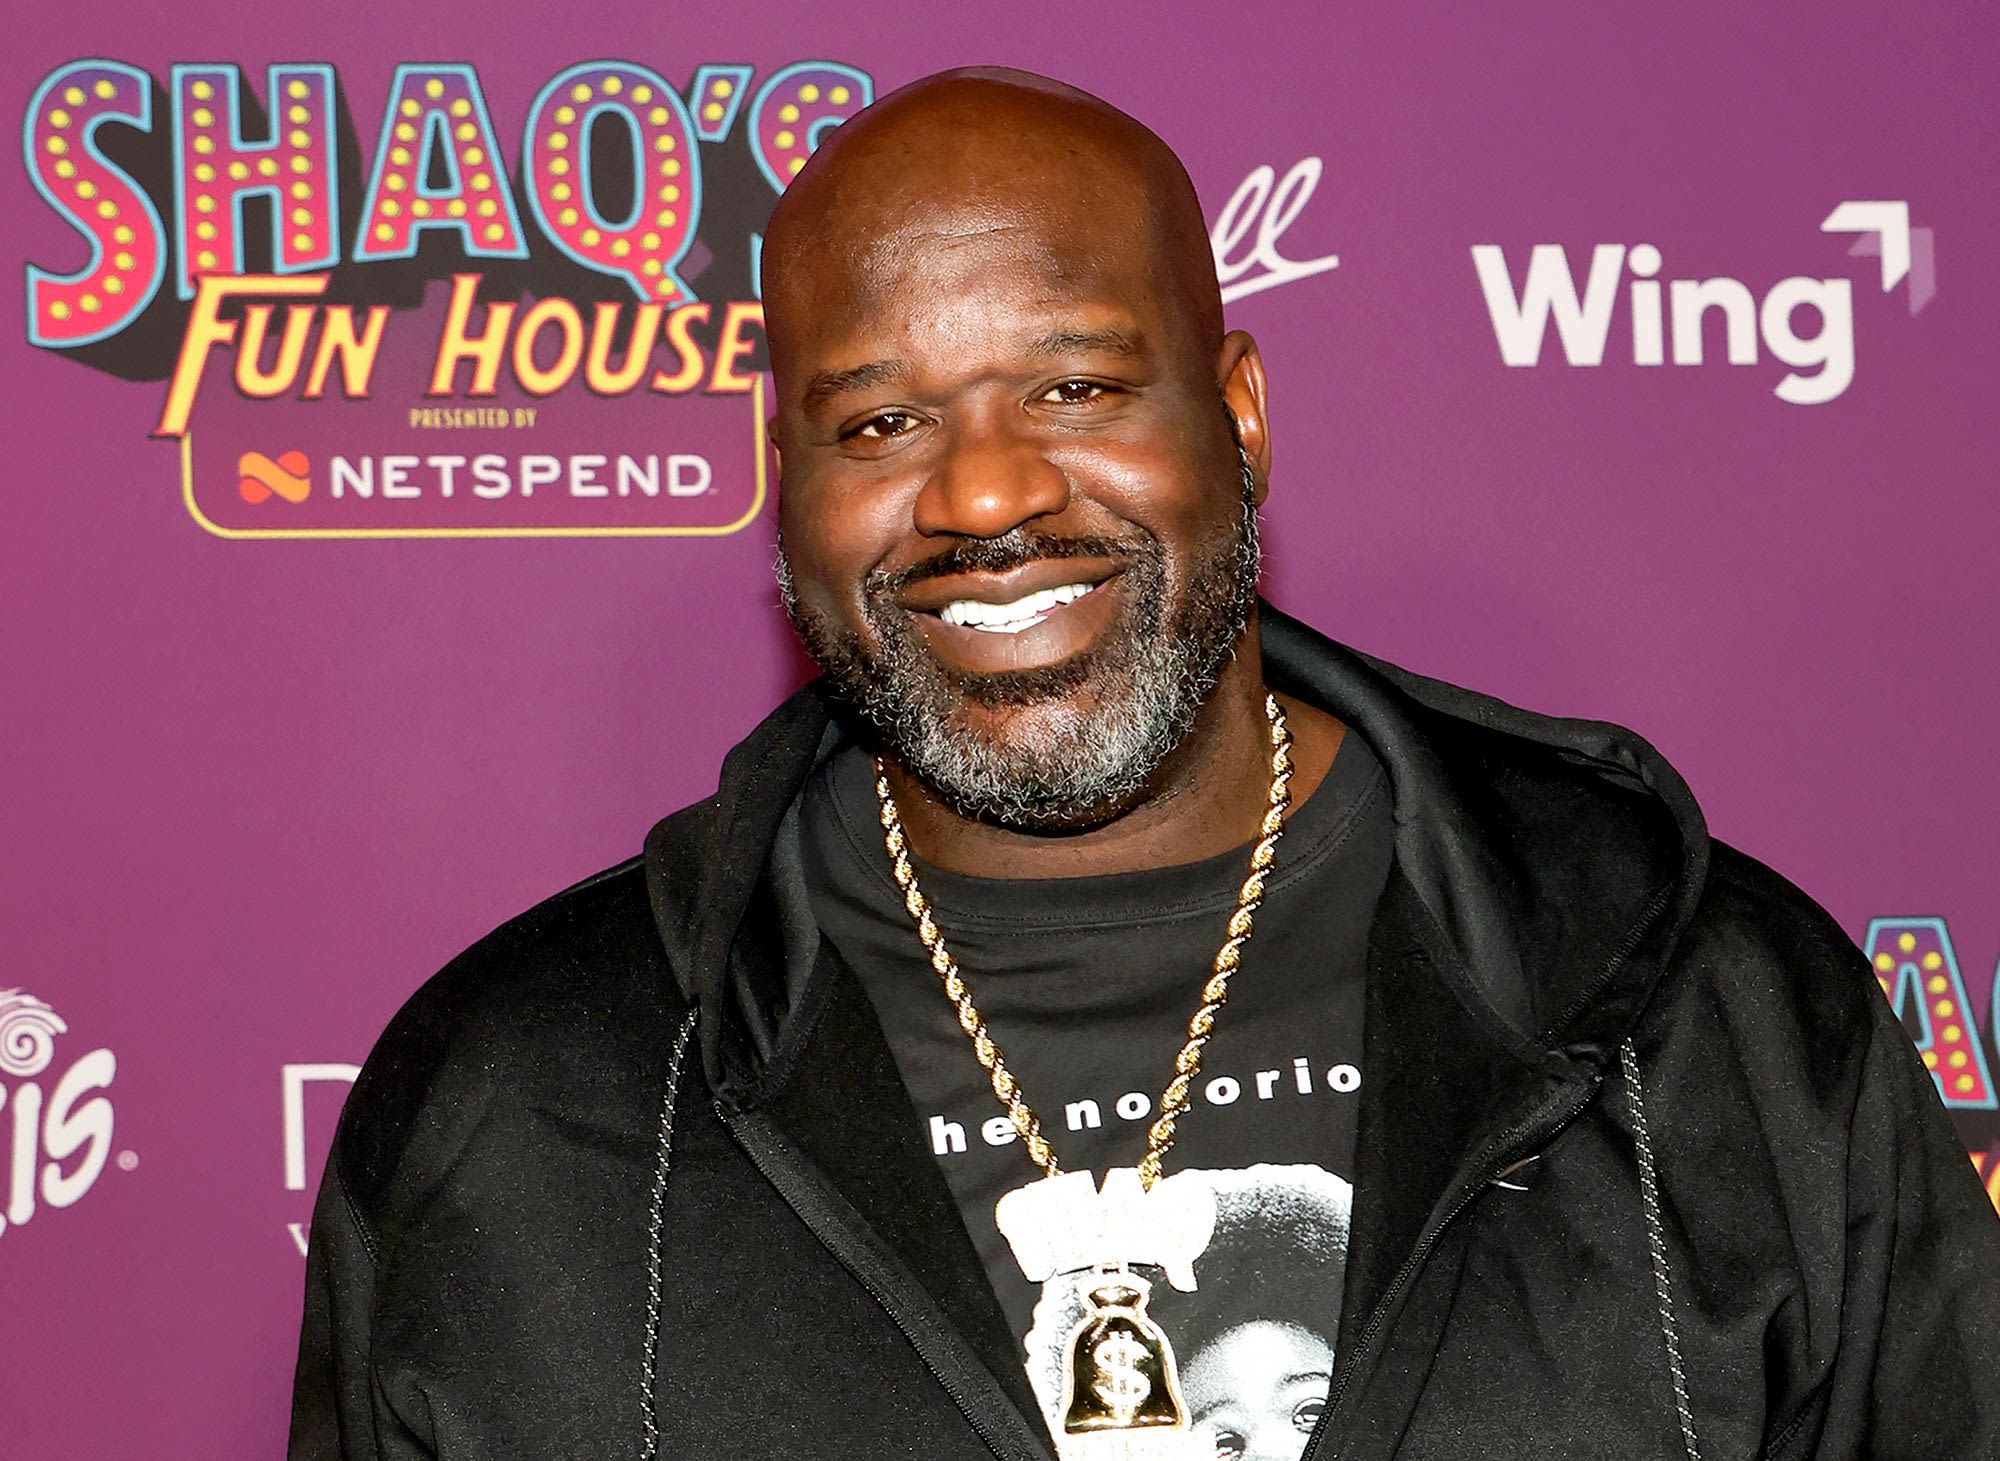 Shaquille O’Neal Reveals He Spends $1,000 on Pedicures: ‘I Know My Feet Stink’